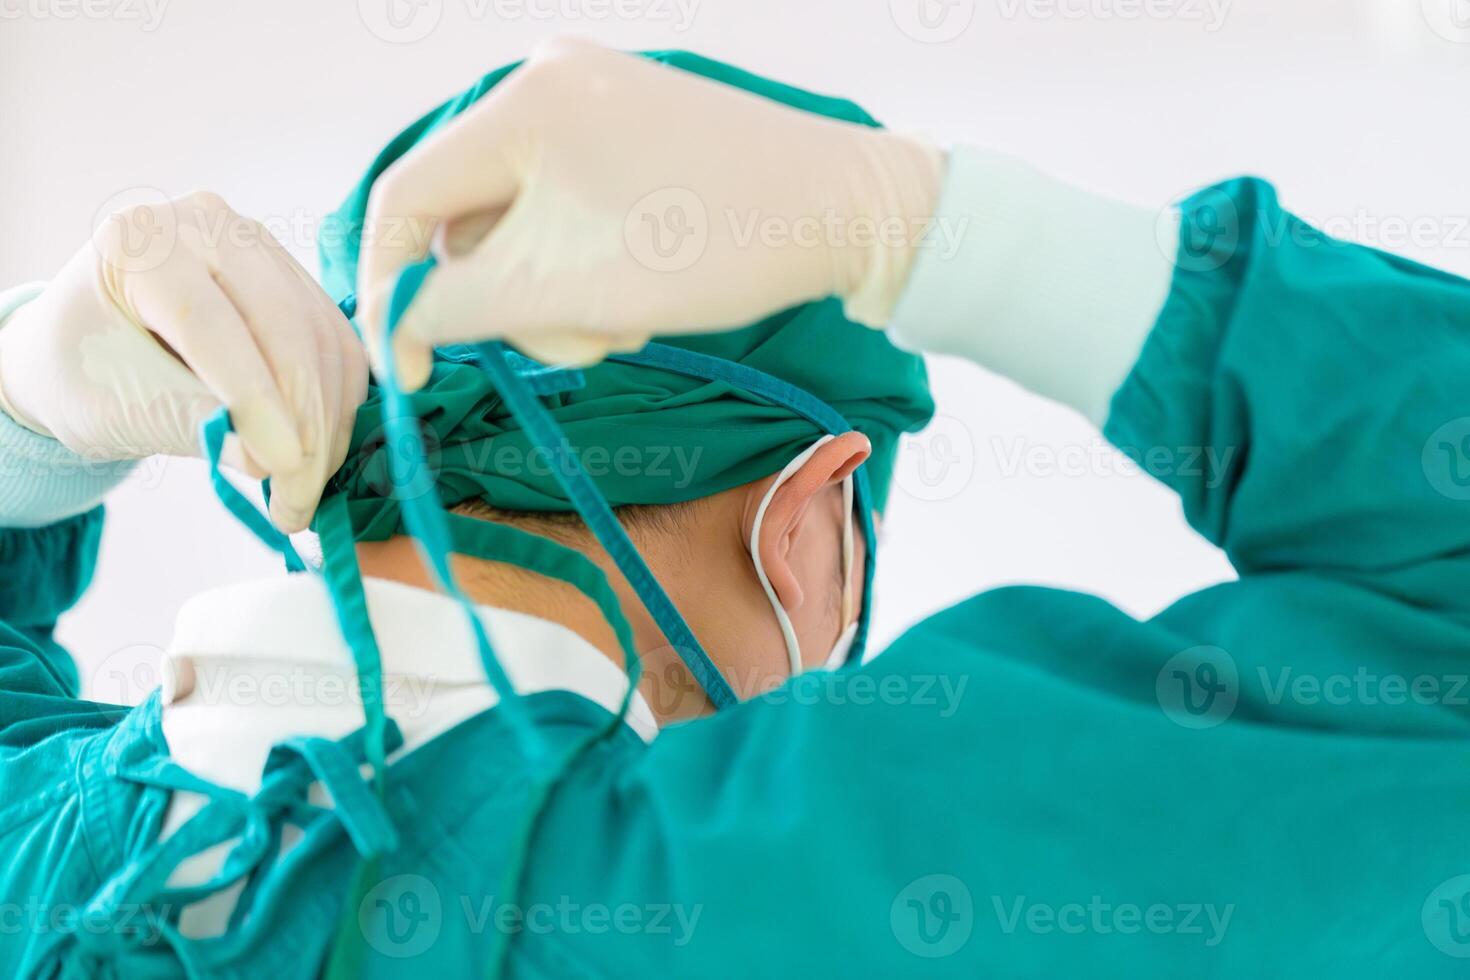 Back view of surgeon tying surgical cap in preparation, Medical team performing surgical operation in operating room, Team surgeon at work in operating room photo